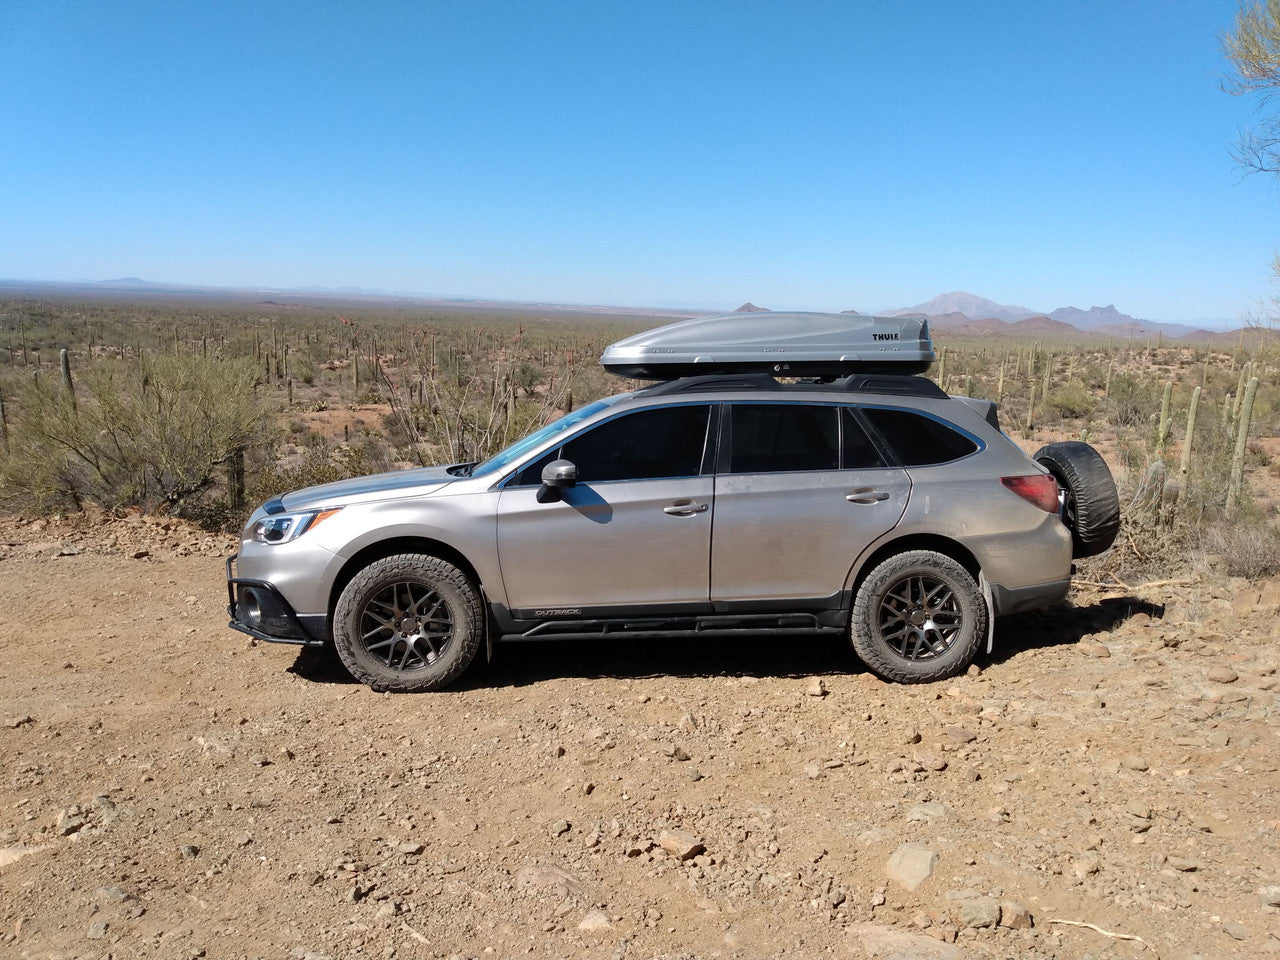 IRONMAN 2" ATS SUSPENSION LIFT KIT SUITED FOR 2020+ SUBARU OUTBACK BT